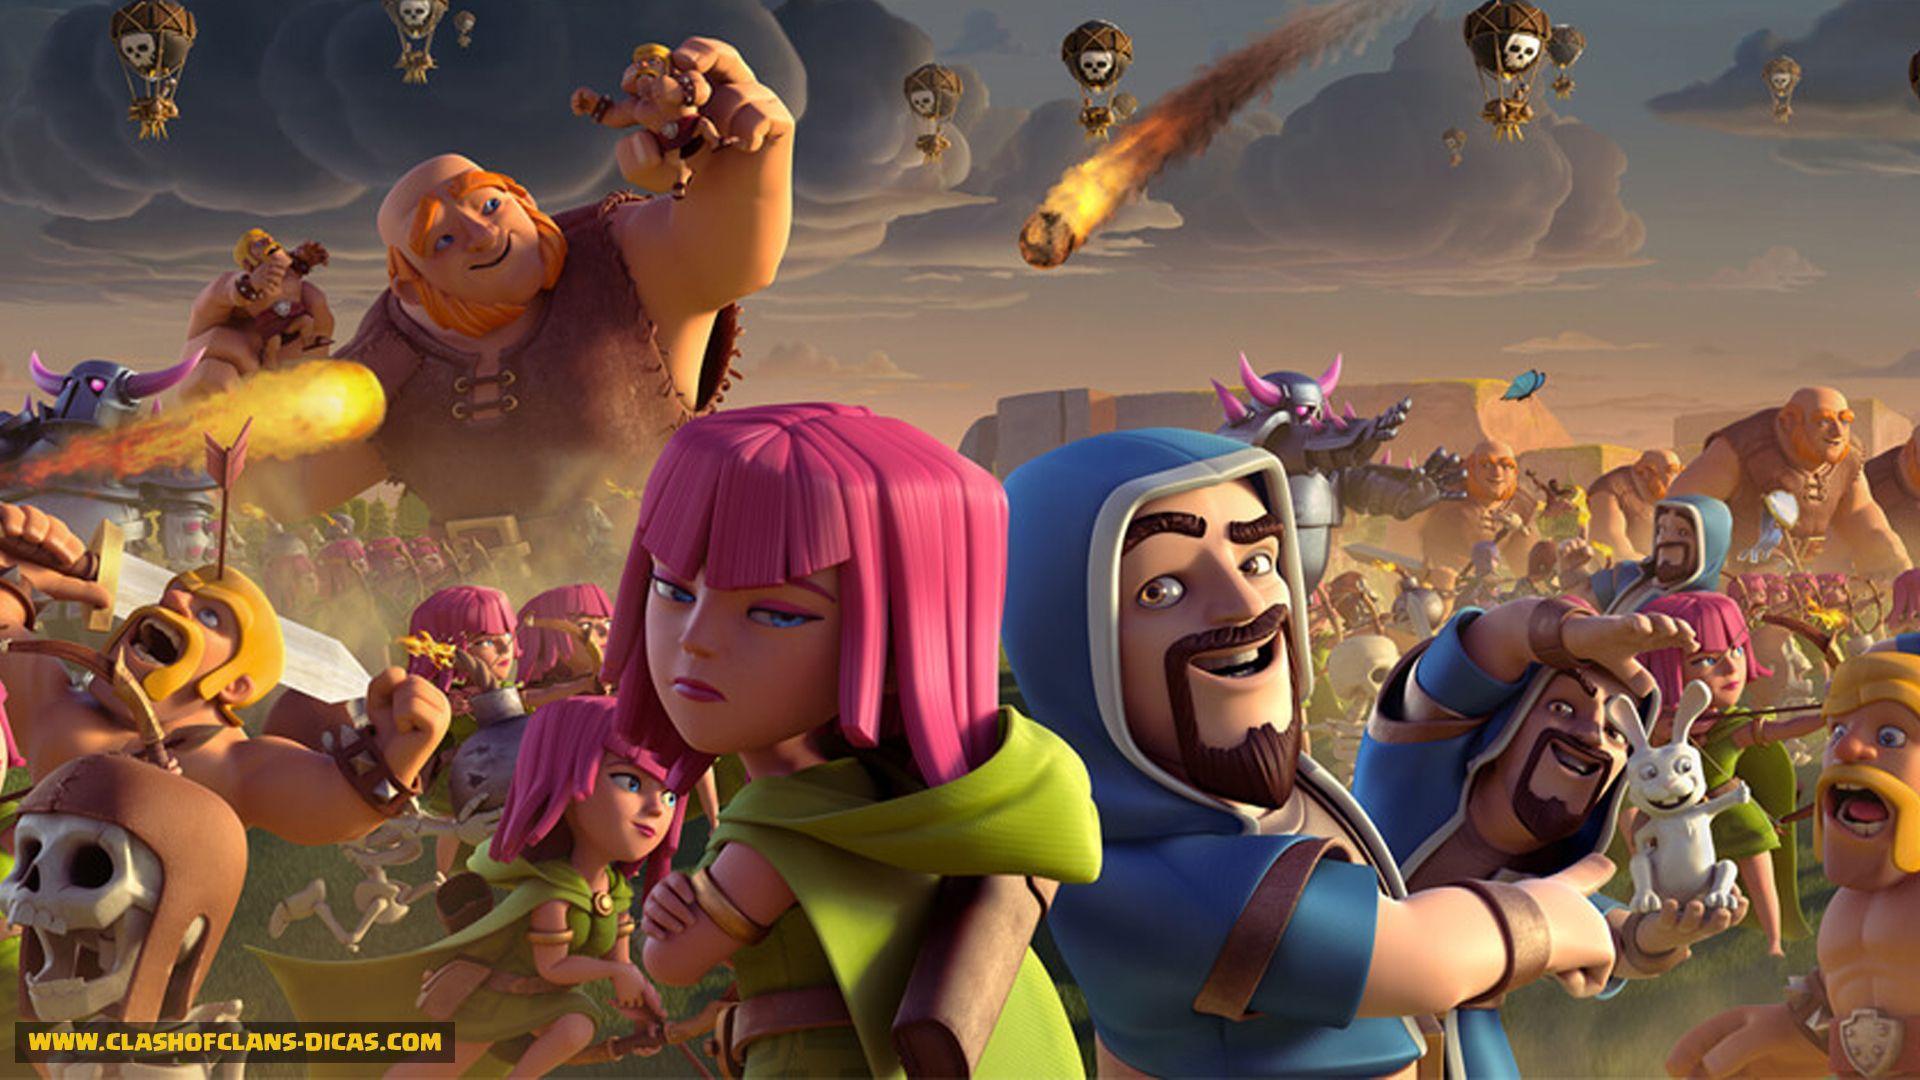 Clash Of Clans Wallpaper 4k Download, Clash Of Clans, Game